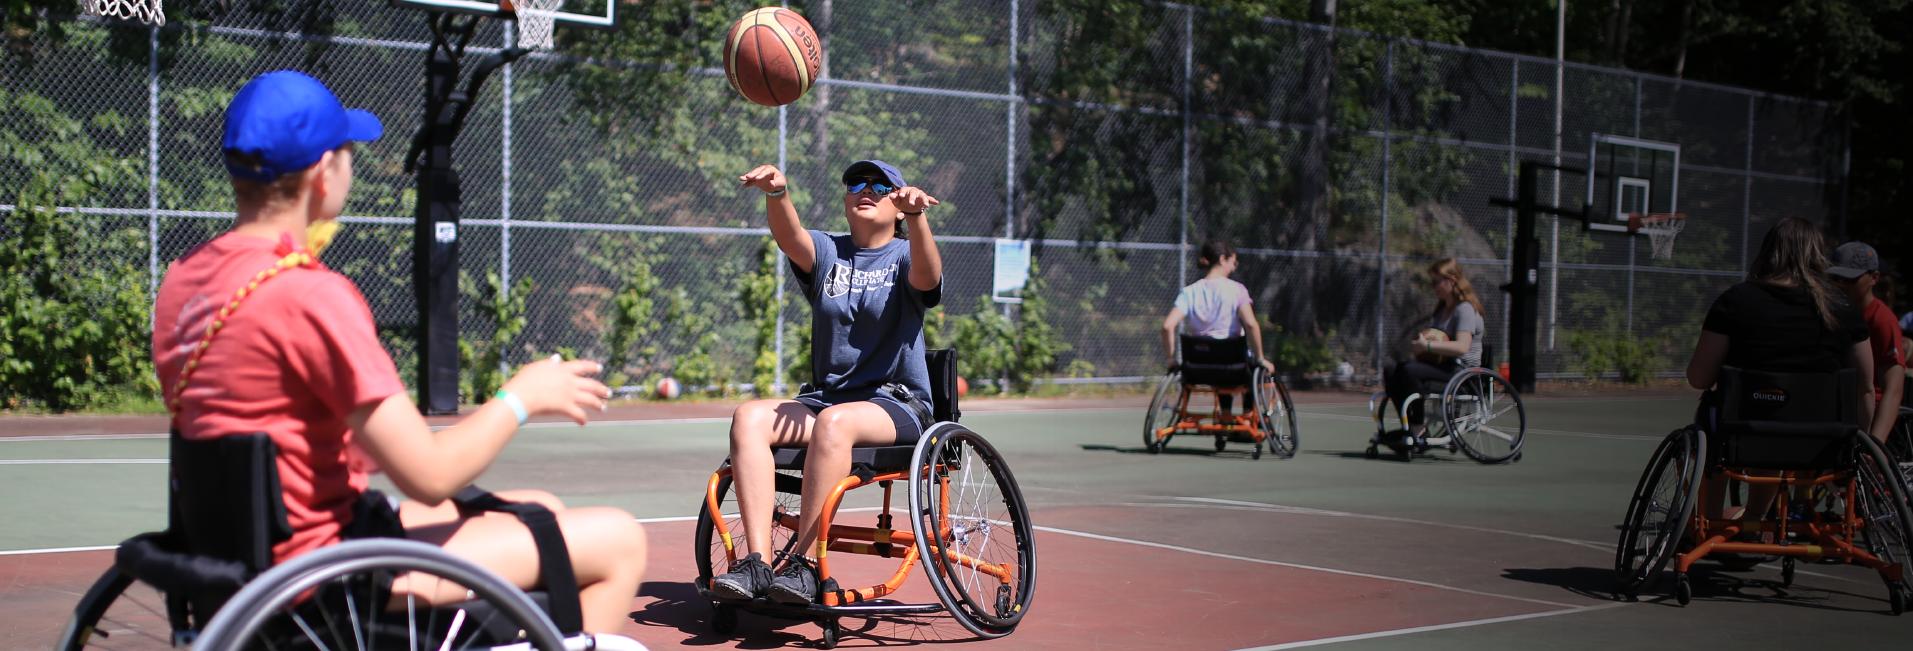 campers in wheelchairs playing basketball at camp